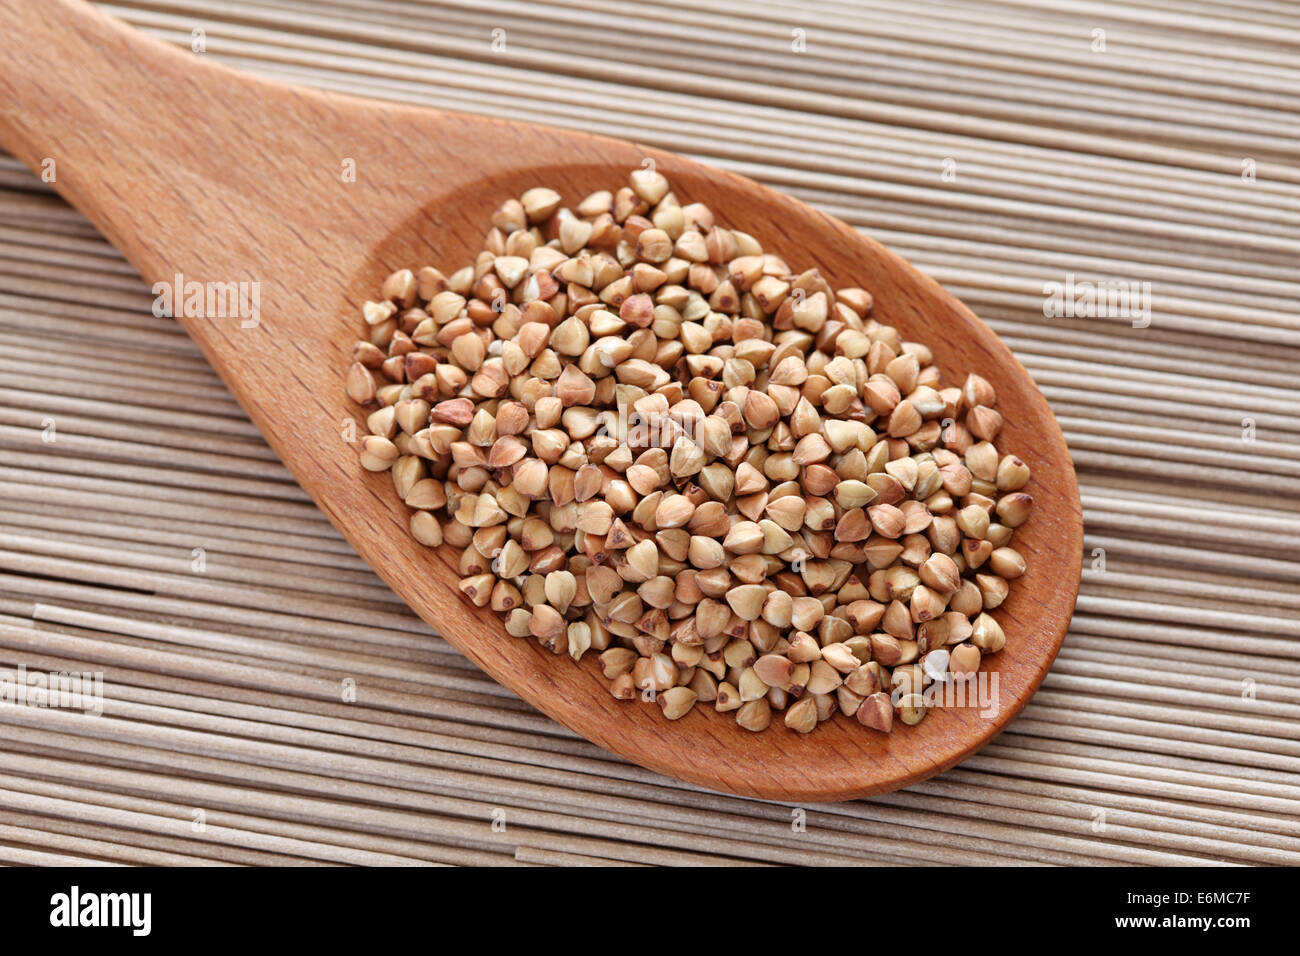 Raw buckwheat in a wooden spoon on soba noodles background. Stock Photo